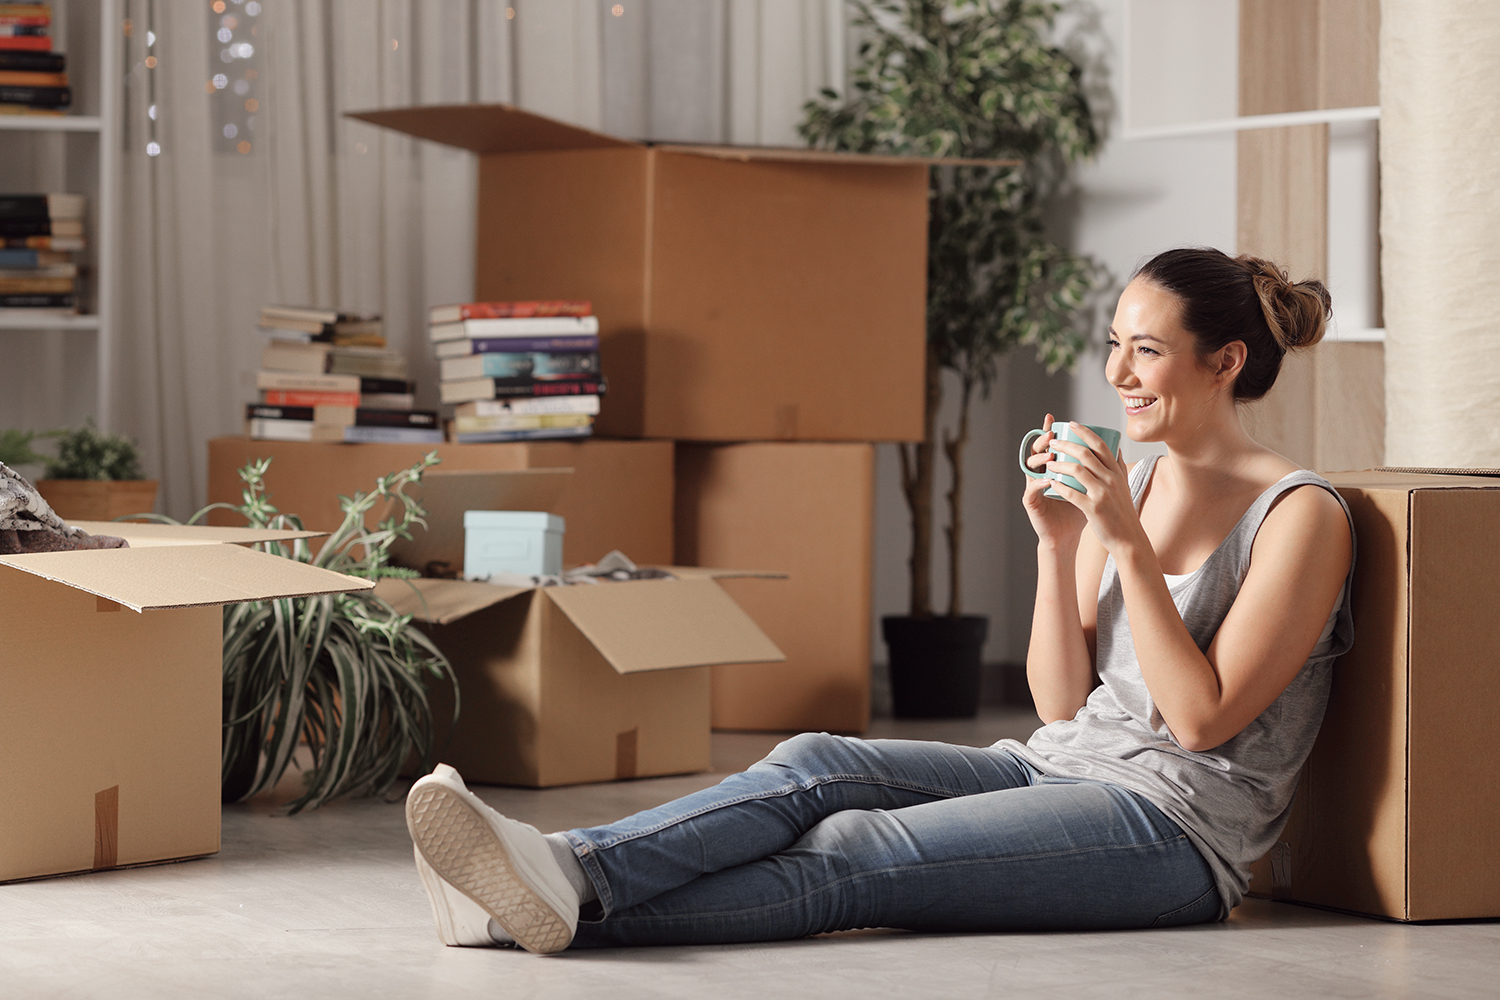 Happy tenant resting drinking coffee moving home sitting on the floor in the night; Shutterstock ID 1414028594; Purchase Order: 12813; Job: Consumer Advertising Templates; Client/Licensee: ERA Real Estate